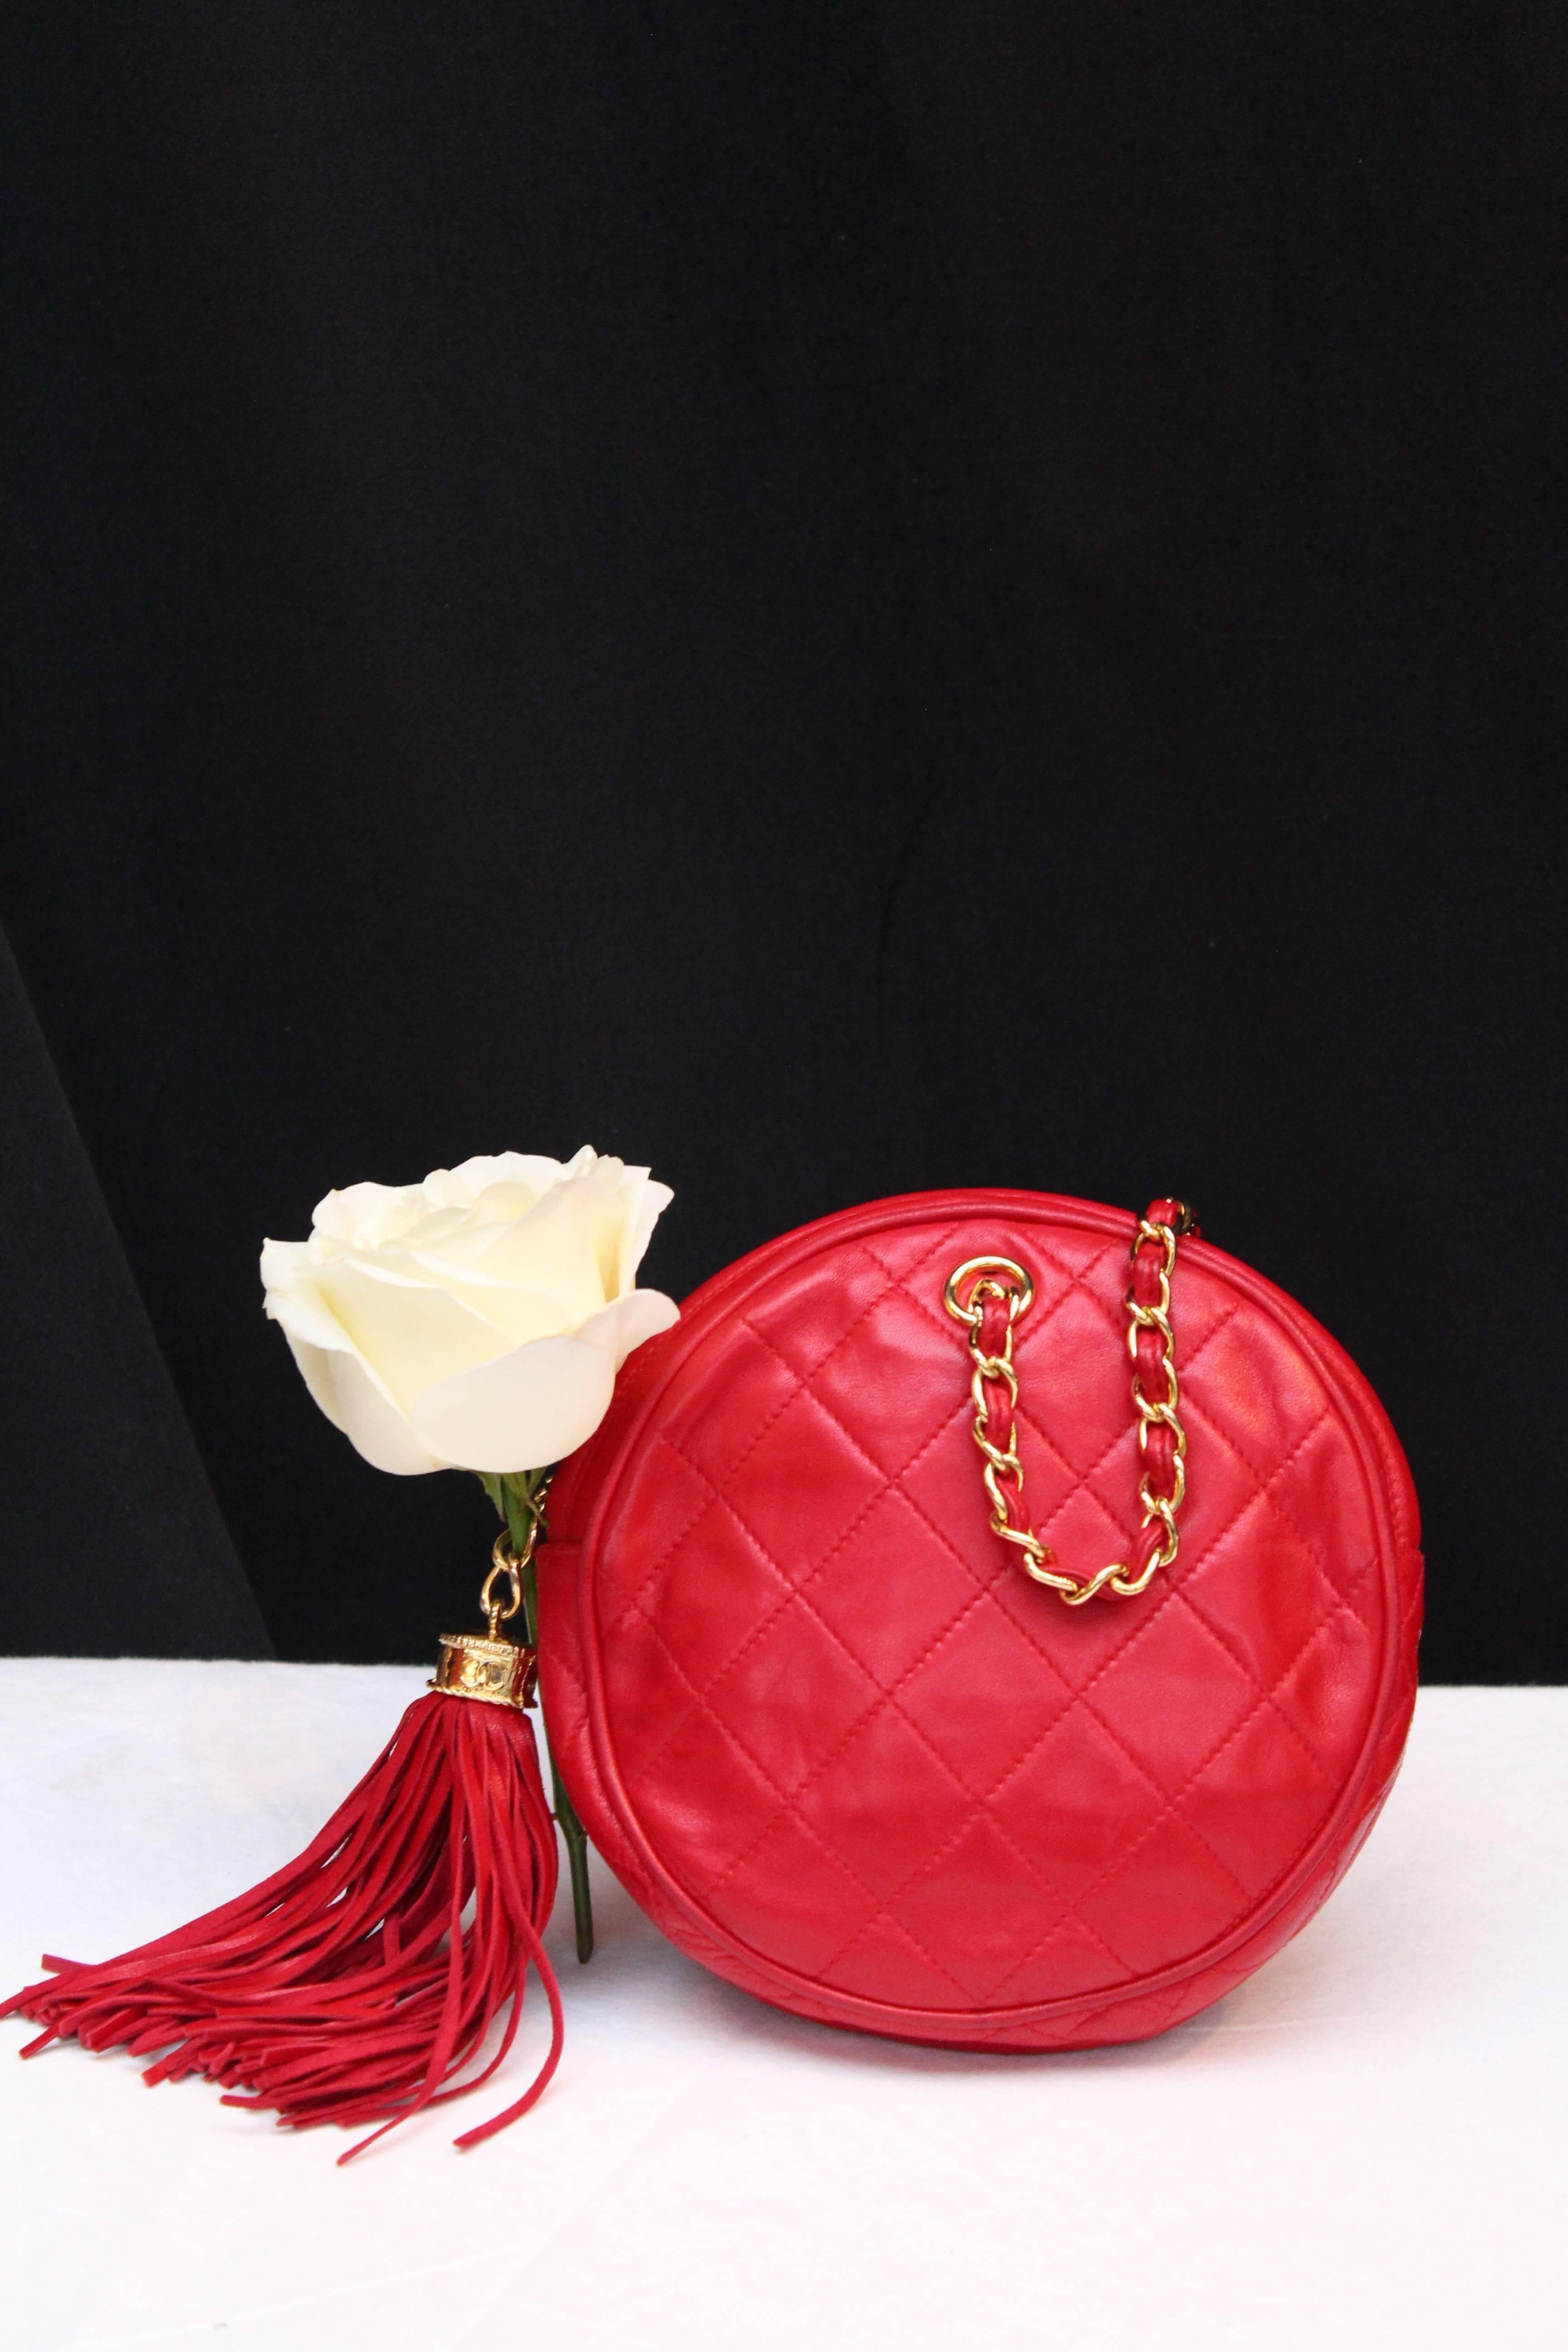 CHANEL (Made in Italy) Nice small round evening hand bag made of red quilted leather, with a short gilded metal chain entwined with red leather. It opens with a gilded metal zip decorated with a red leather tassel. Red leather lining, bearing the